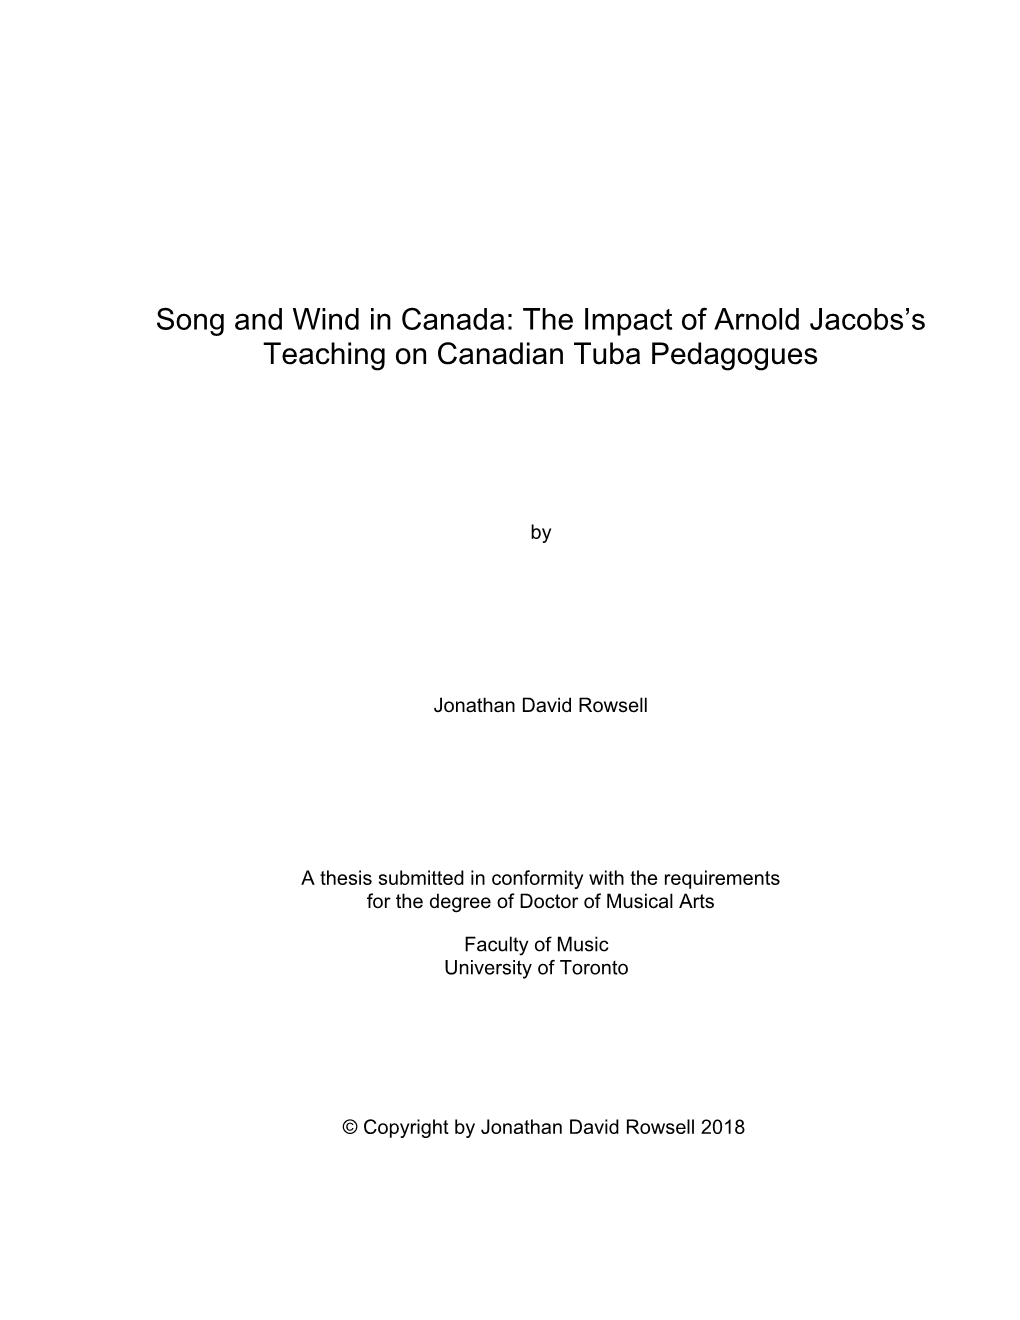 The Impact of Arnold Jacobs's Teaching on Canadian Tuba